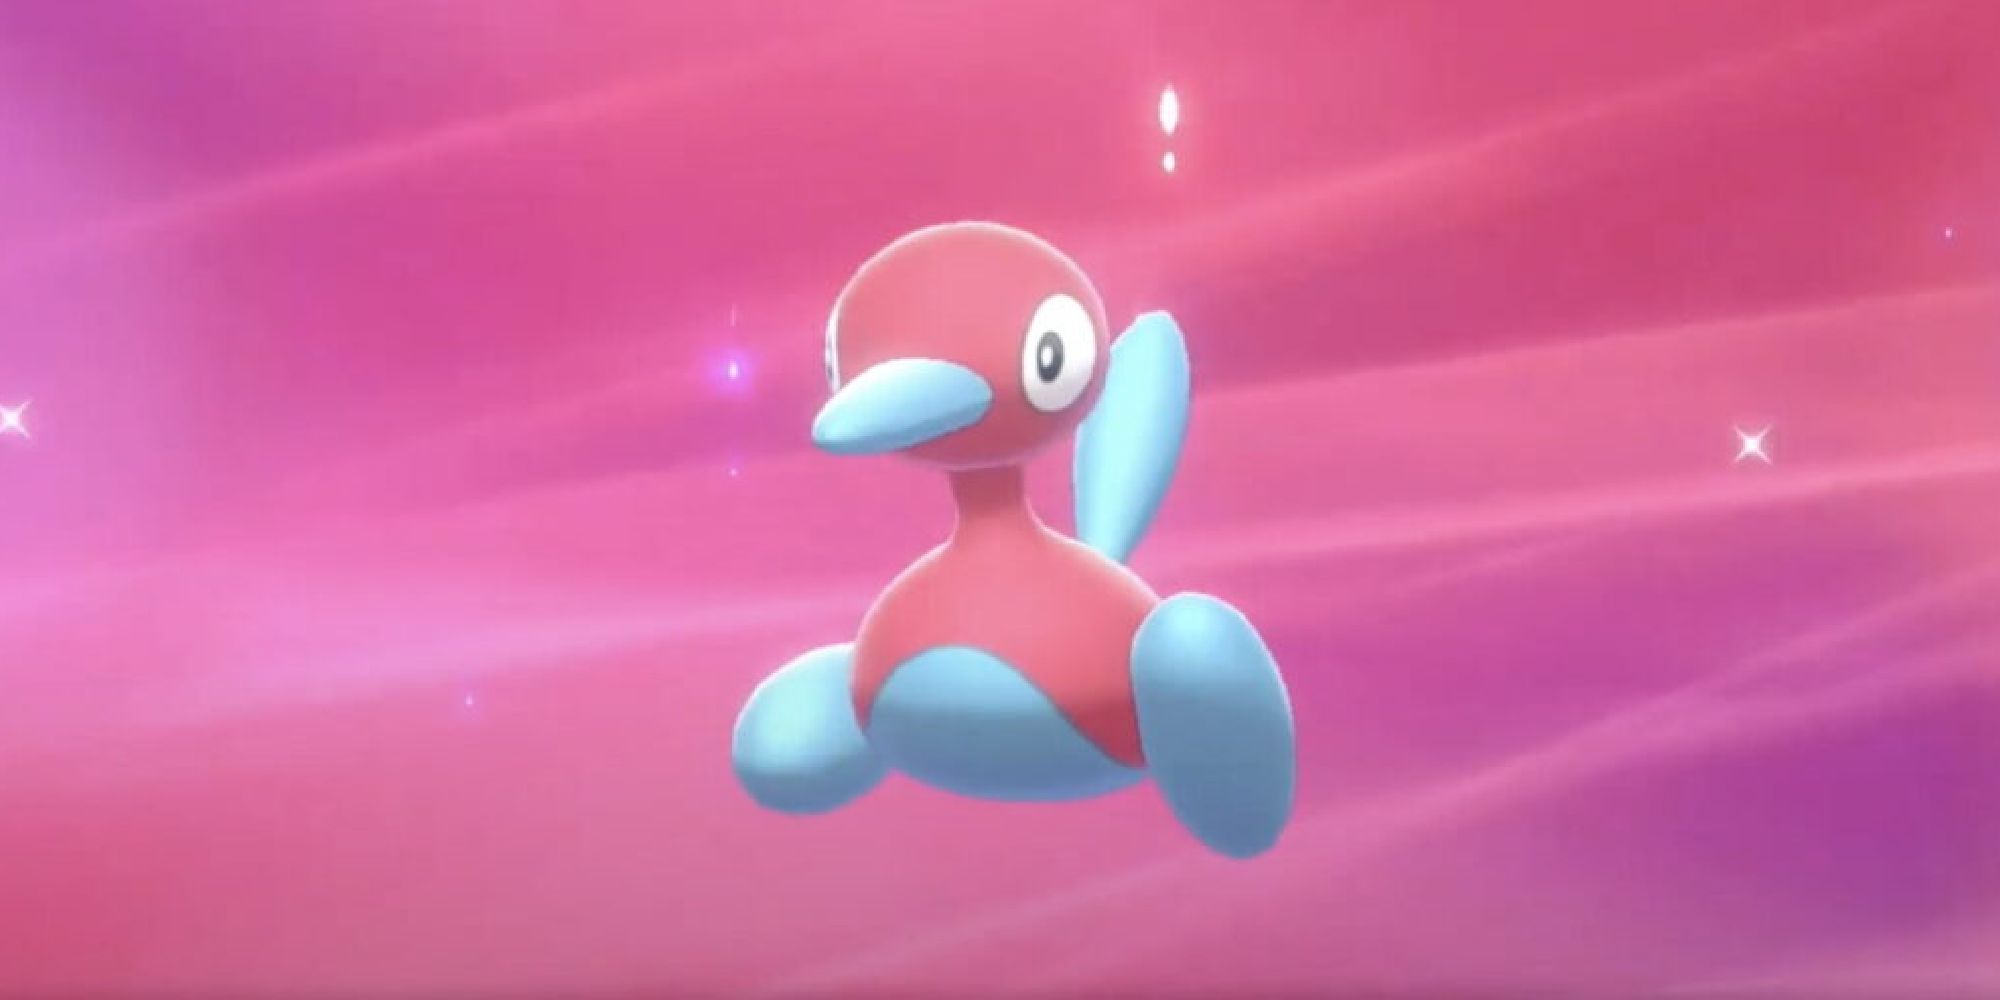 Porygon2 just after evolving in Pokemon Sword & Shield